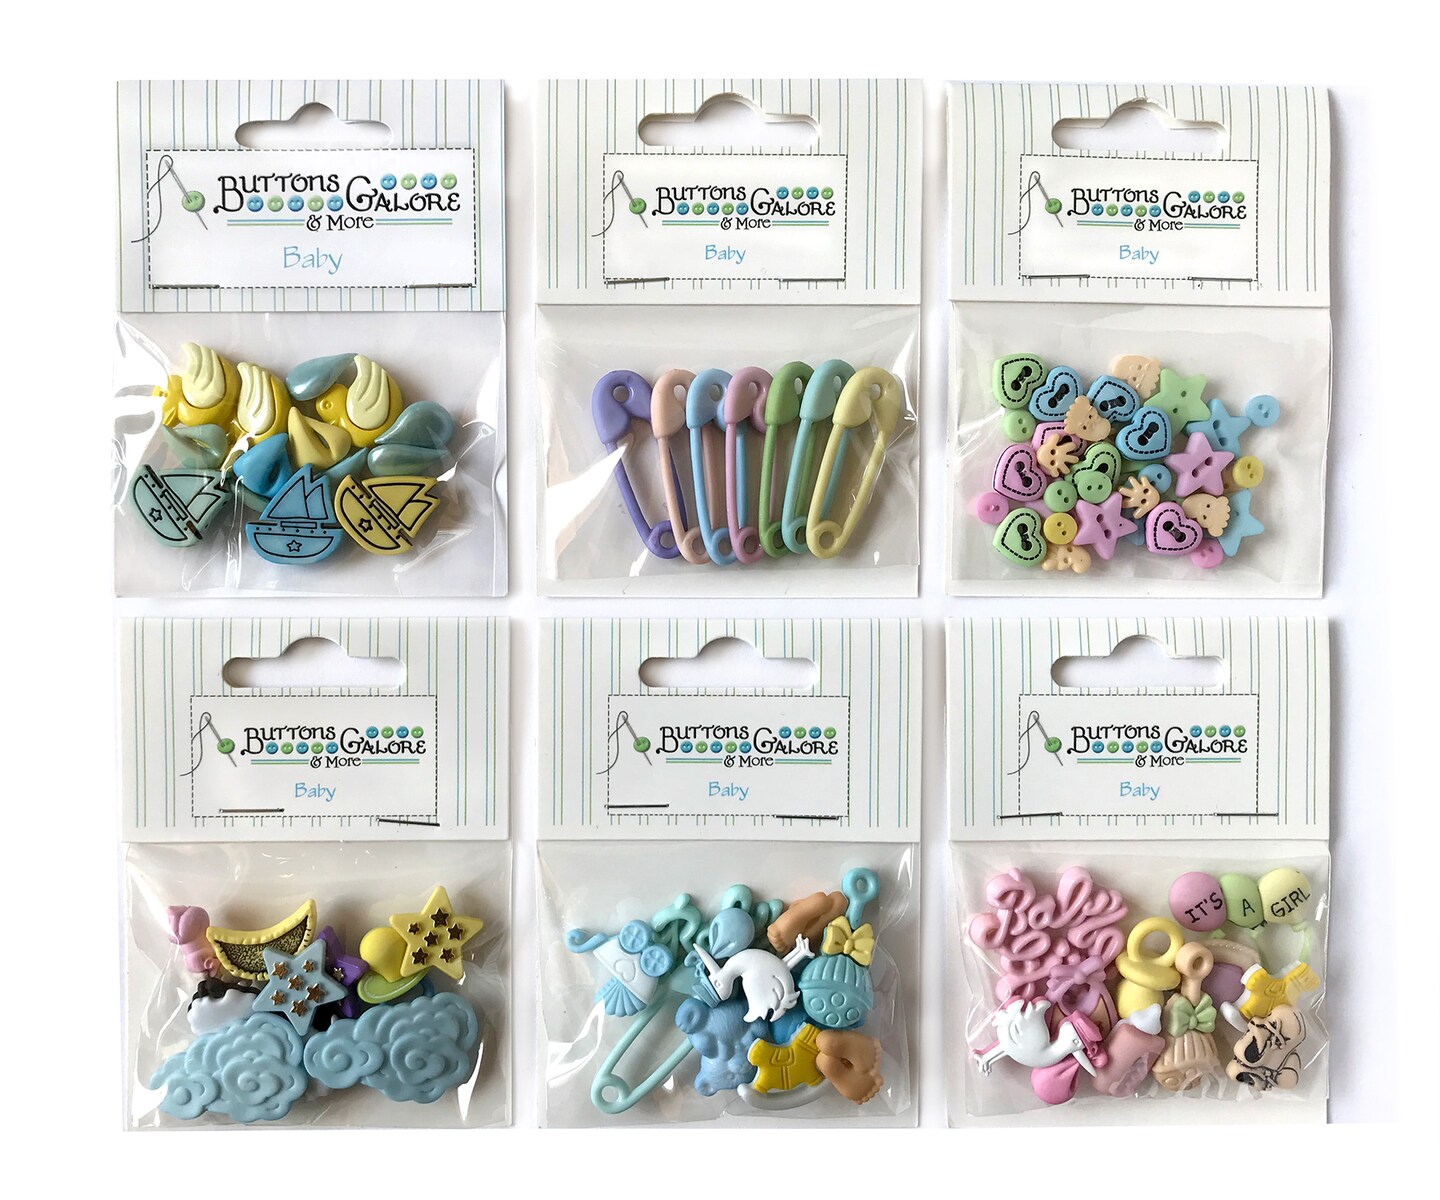 Buttons Galore 50+ Assorted Baby Buttons - Bundle of 6 Different Sets of Baby Themed Buttons